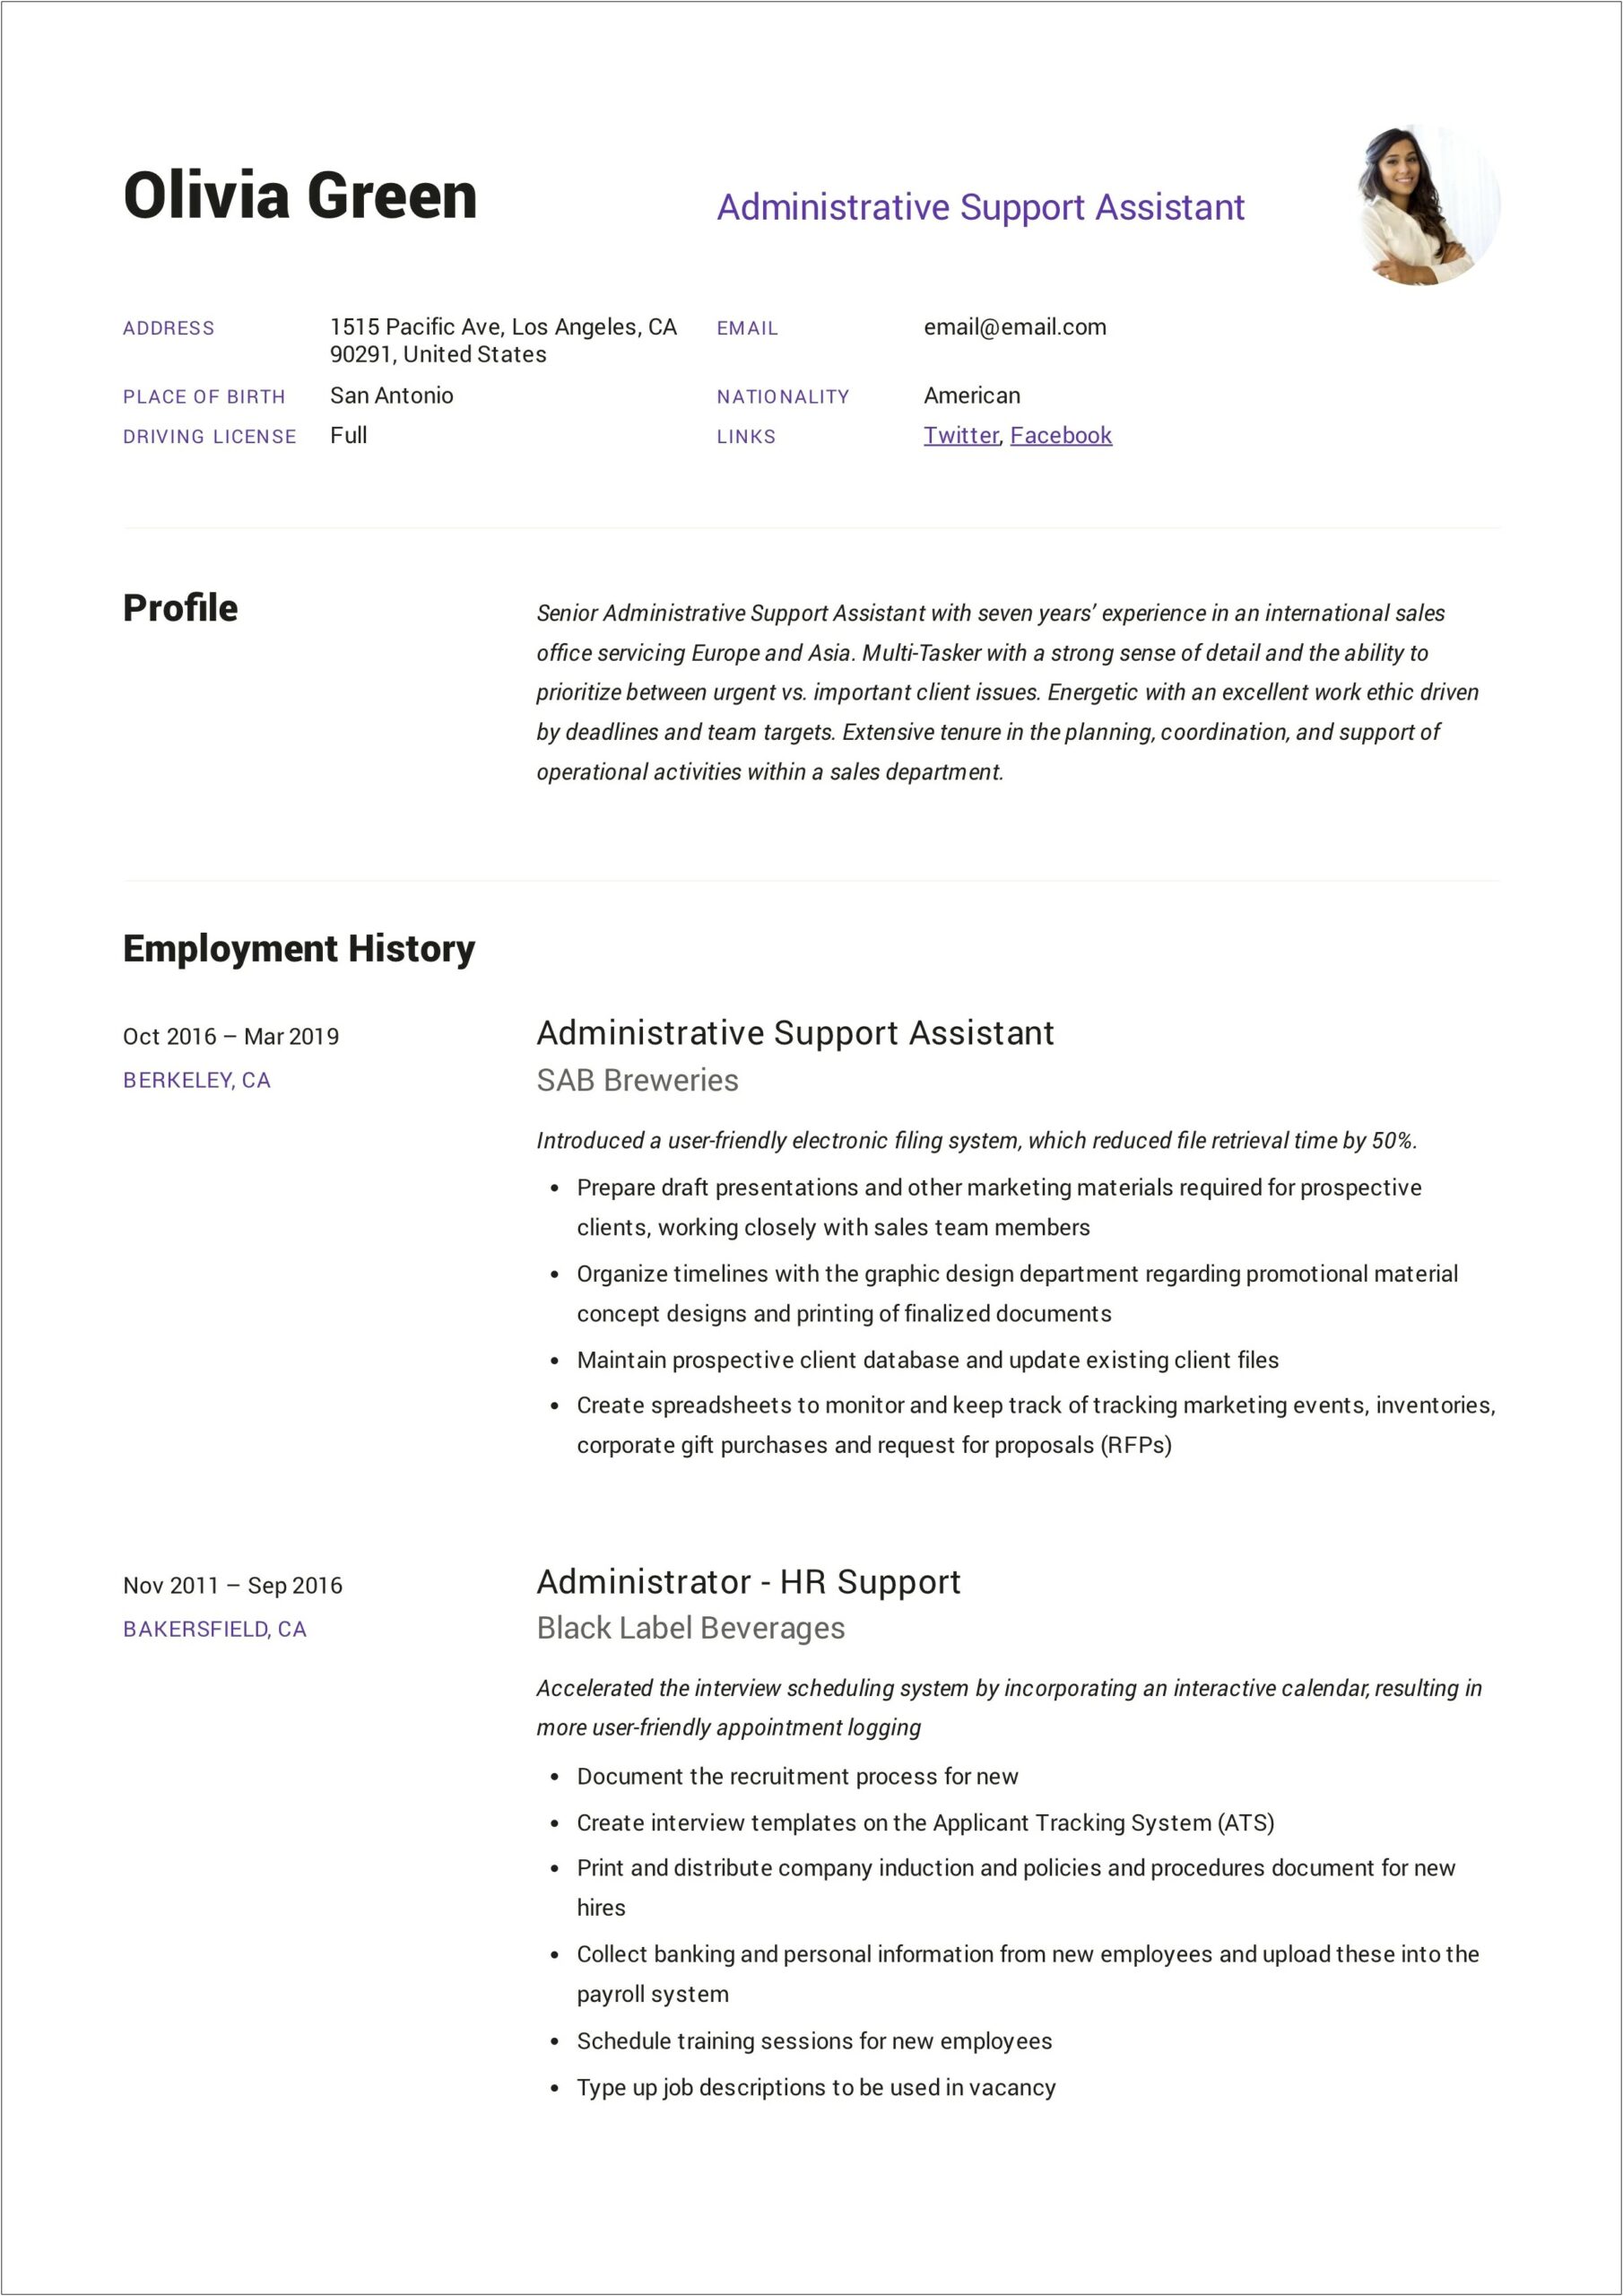 Medical Front Office Coordinator Resume Example